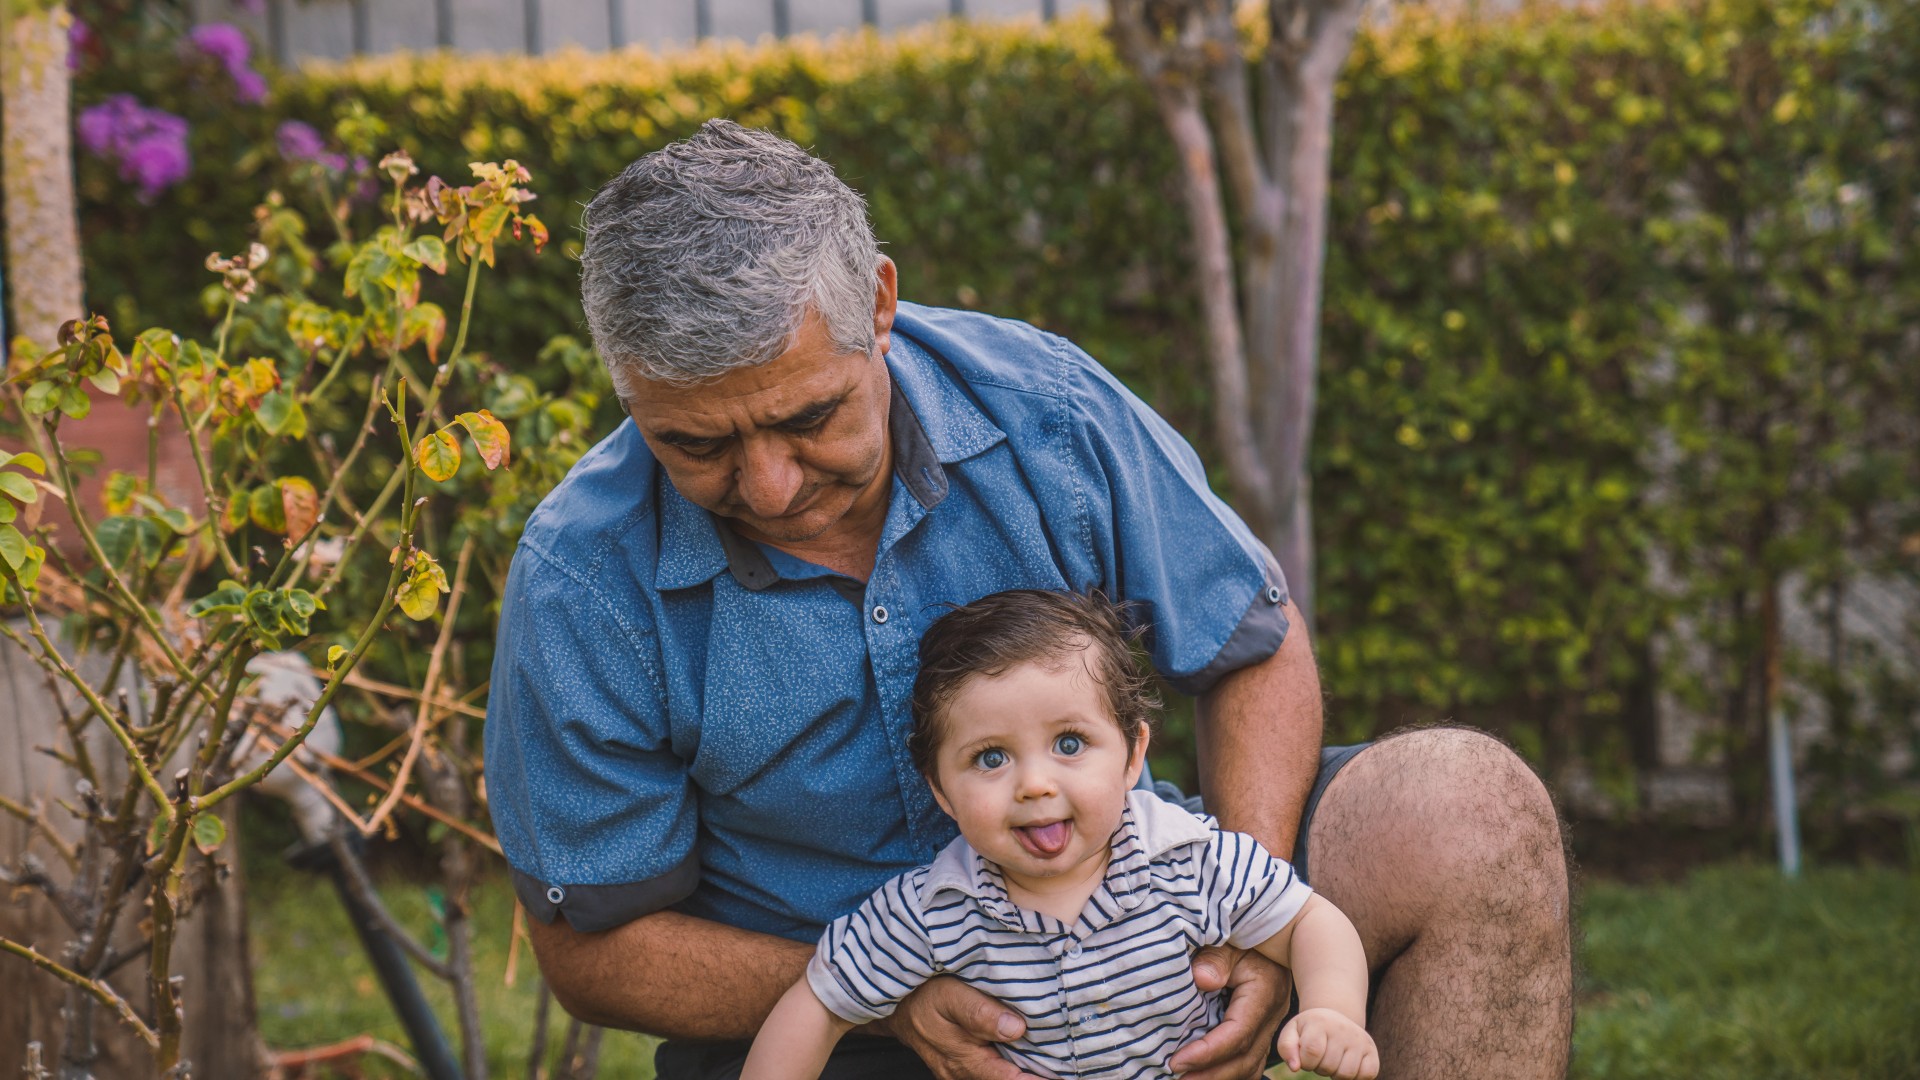 Grandfather wearing a blue shirt hold his grandchild making a silly face